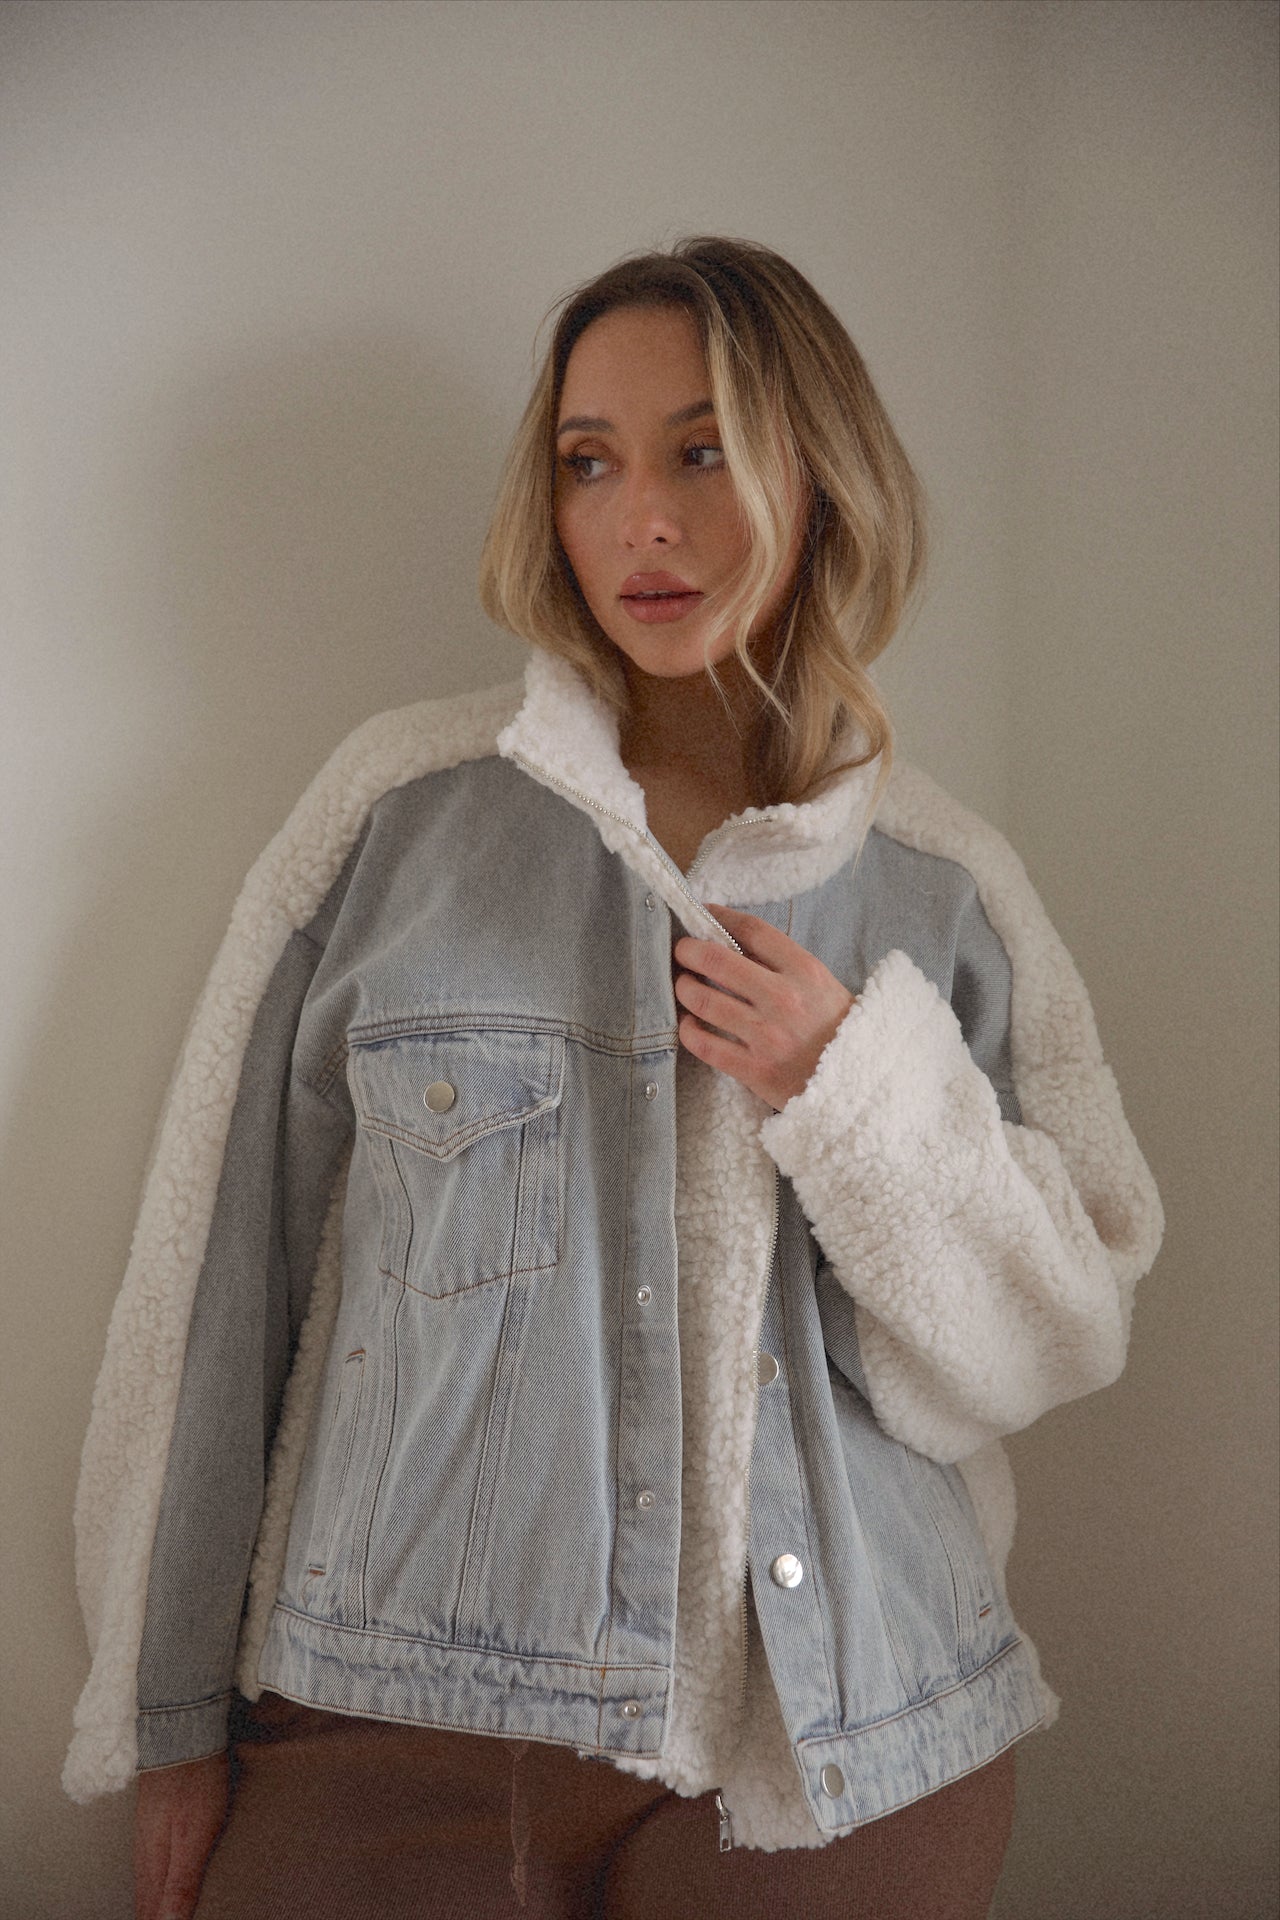 oversized denim jacket with sherpa lining and a zip up denim jacket closure